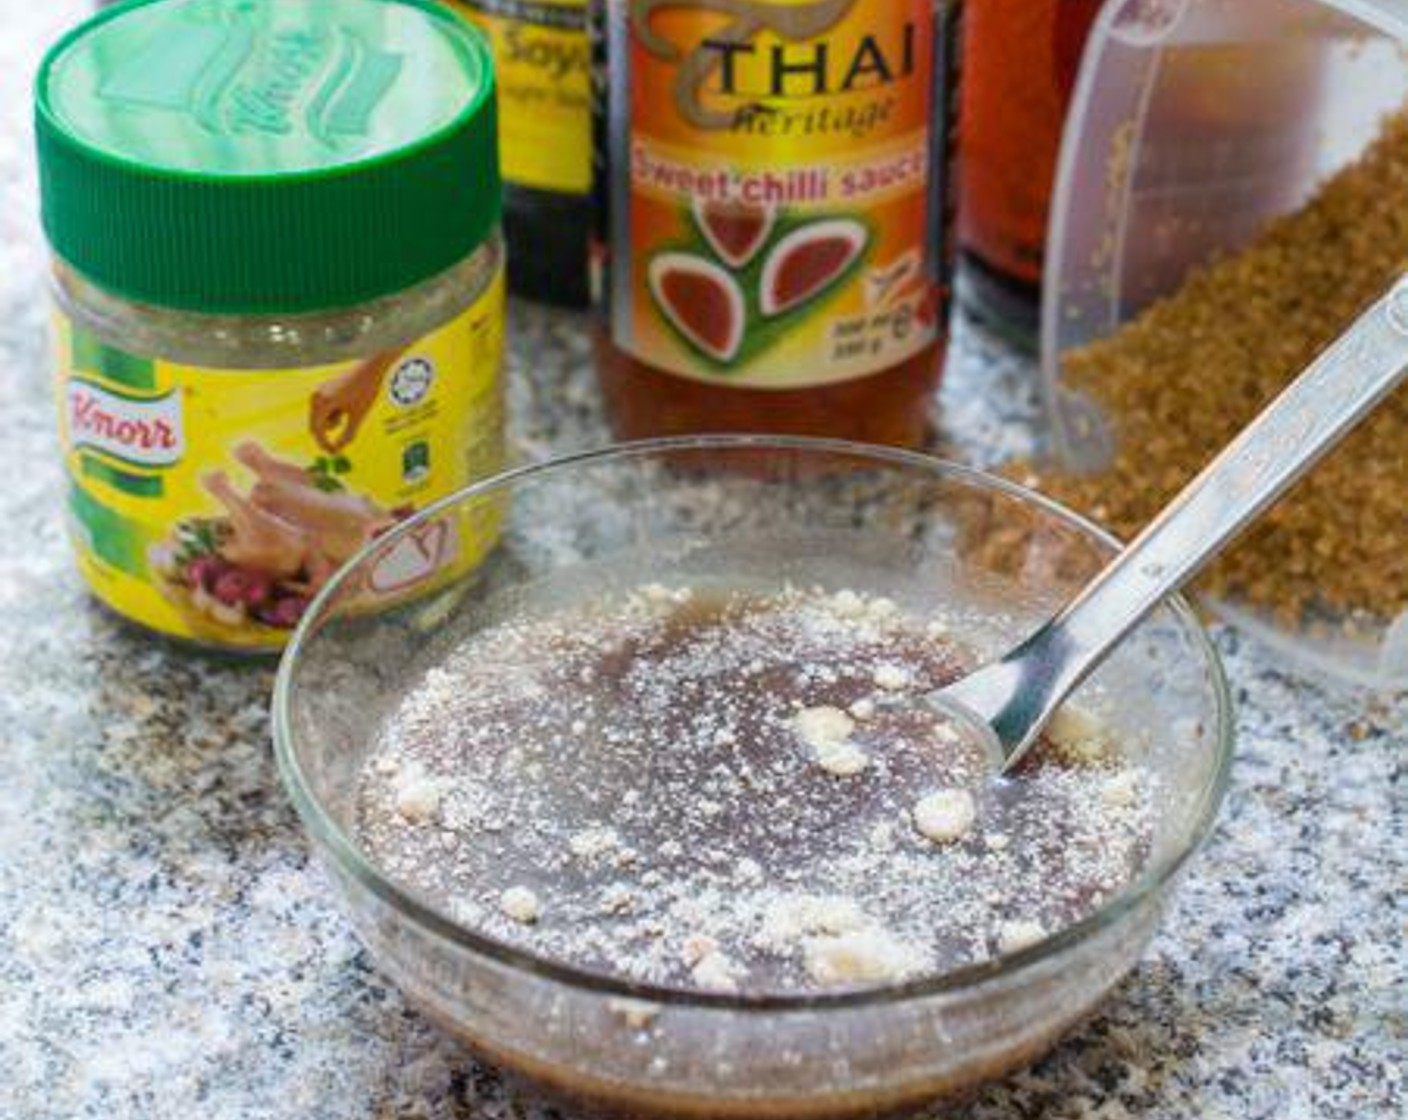 step 3 Discard the pulp, saving about 2 tablespoons of the tamarind water. Add Sweet Chili Sauce (1 Tbsp), Oyster Sauce (1 Tbsp), Soy Sauce (1 Tbsp), Fish Sauce (1/2 Tbsp), Brown Sugar (1 Tbsp) and Chicken Stock Granules (1/2 tsp). Mix well.